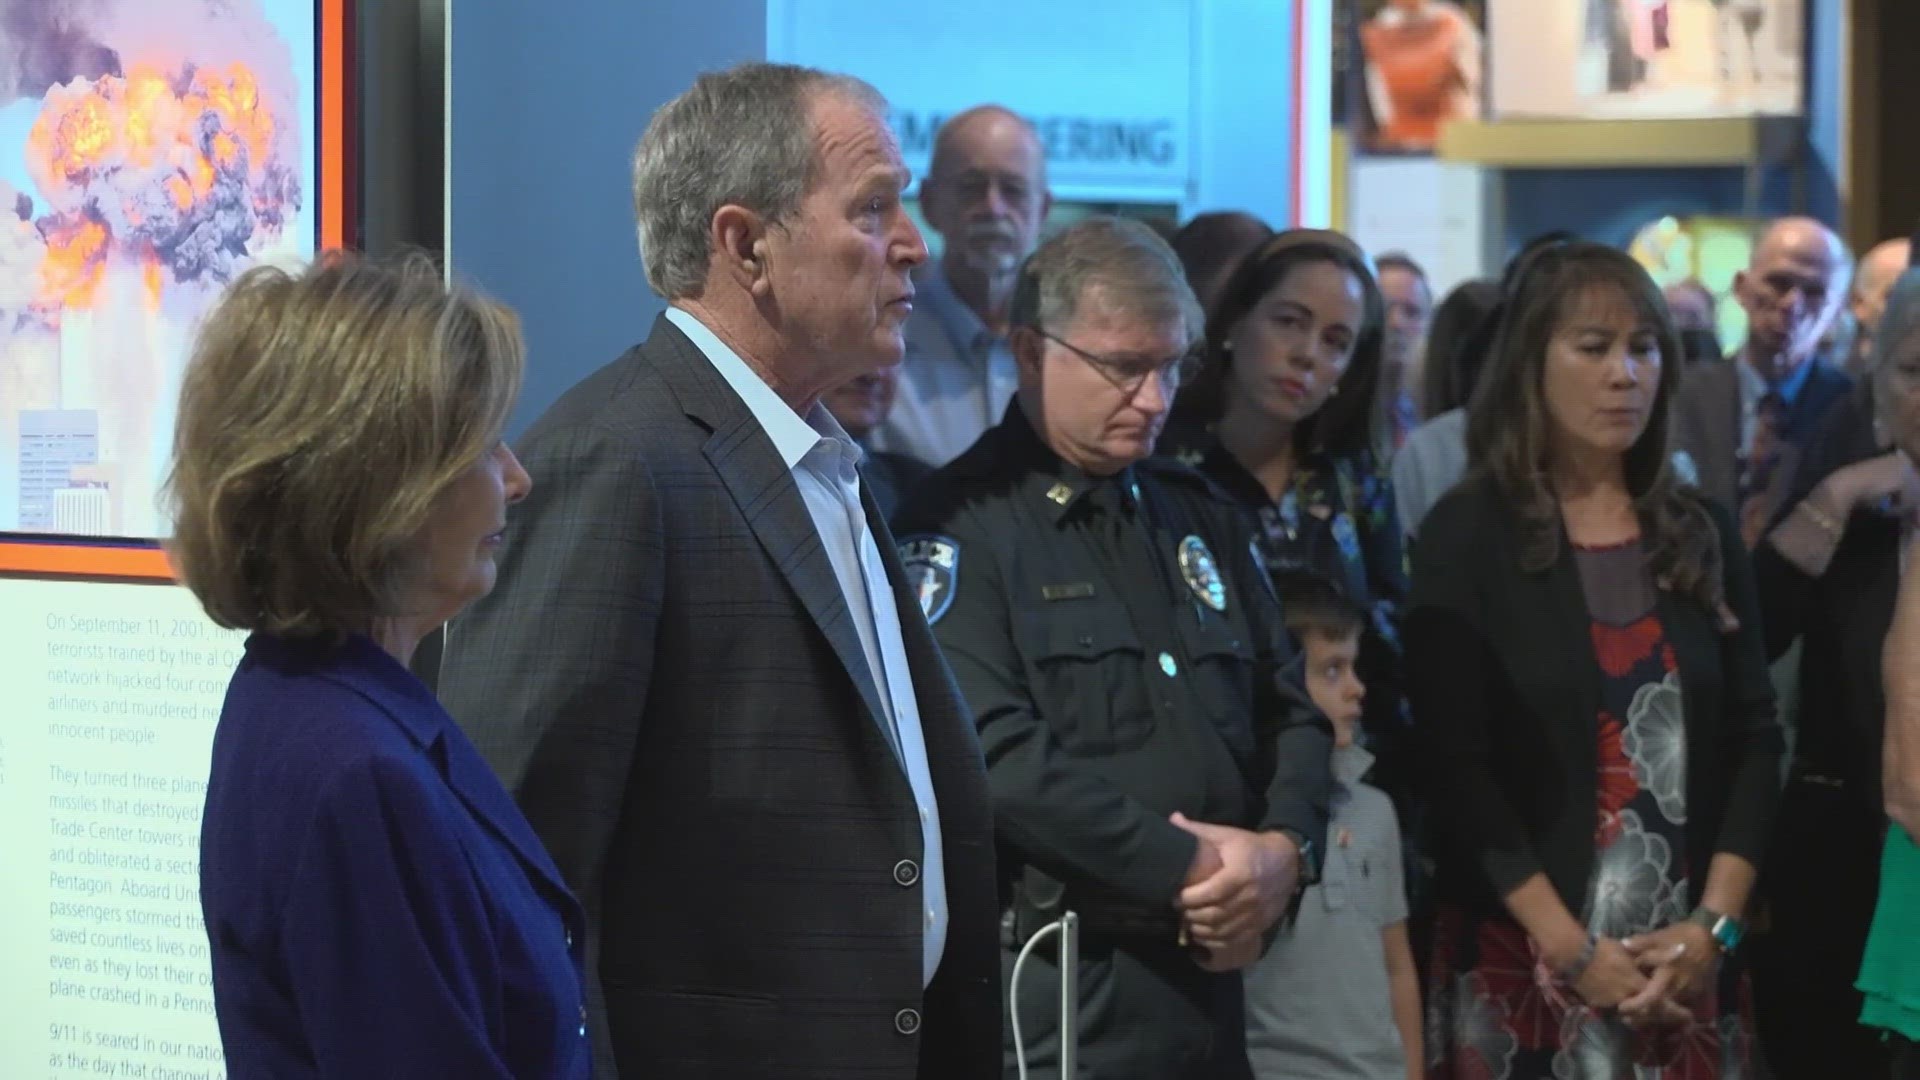 Bush offered minimal words before a moment of silence remembering the victims.